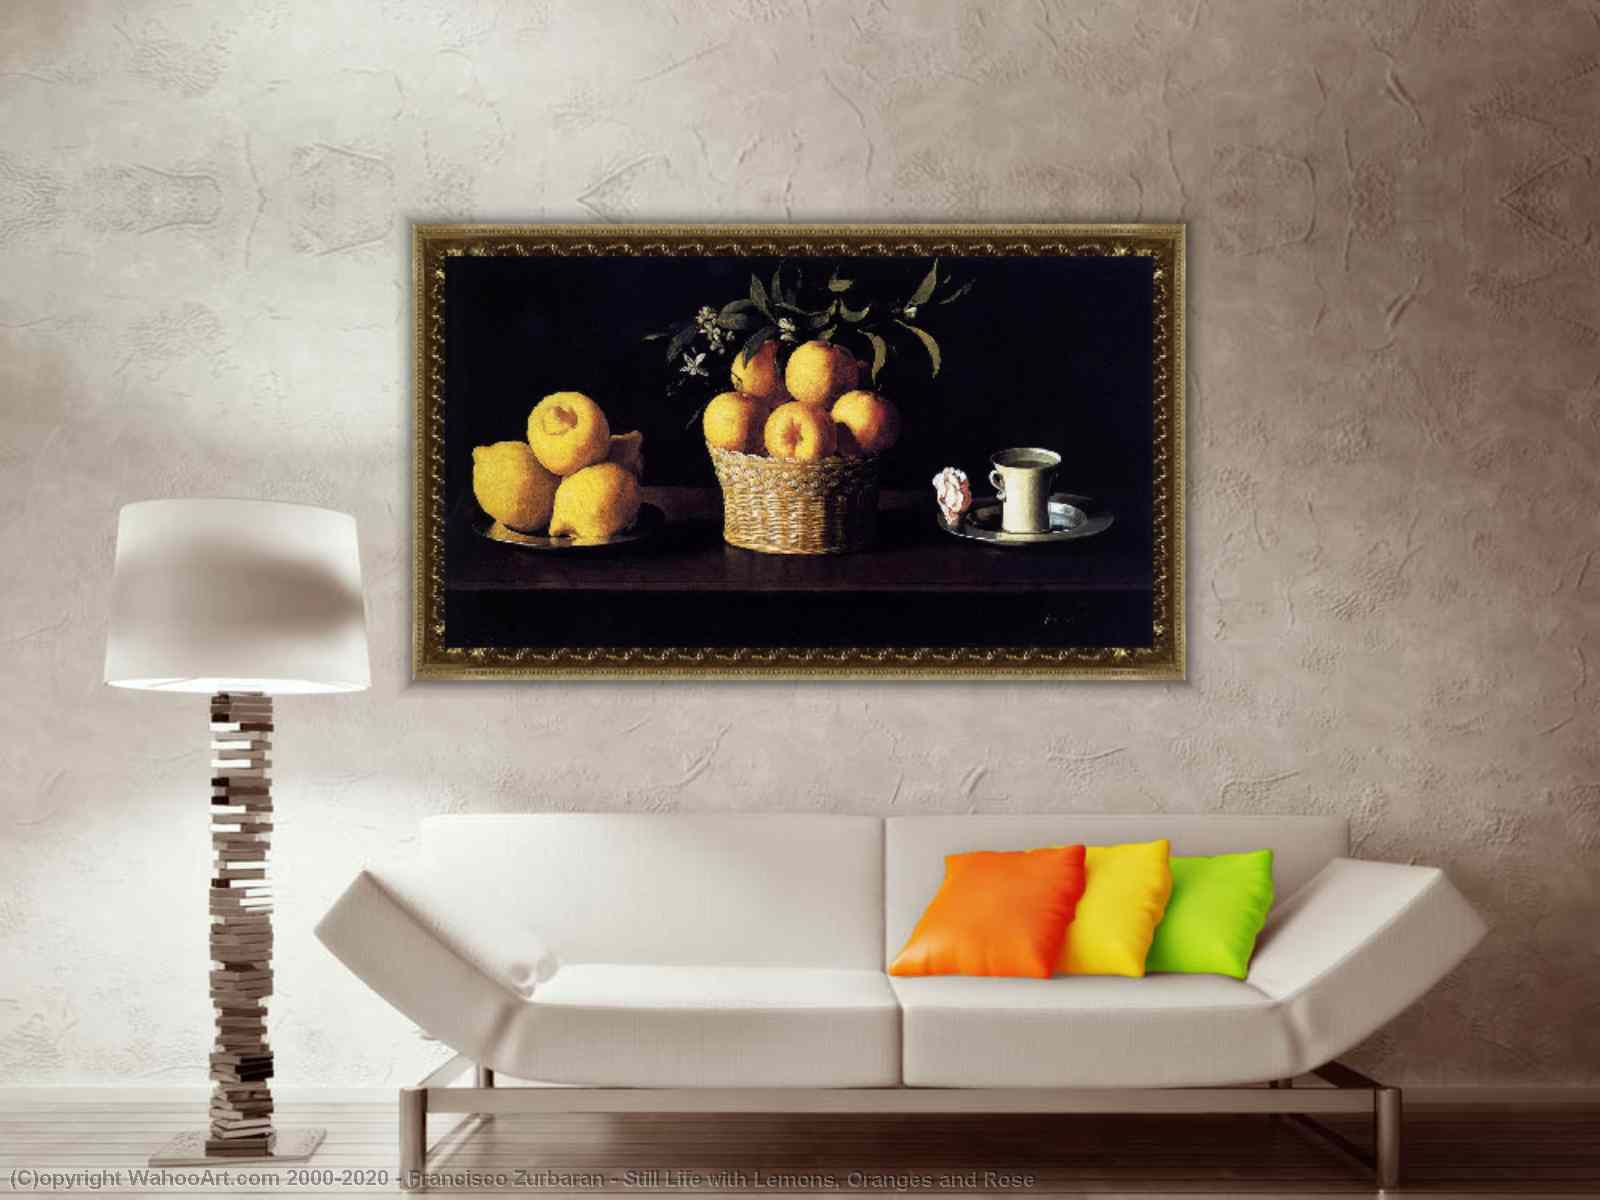 Still Life with Lemons, Oranges and a Rose - Wikipedia